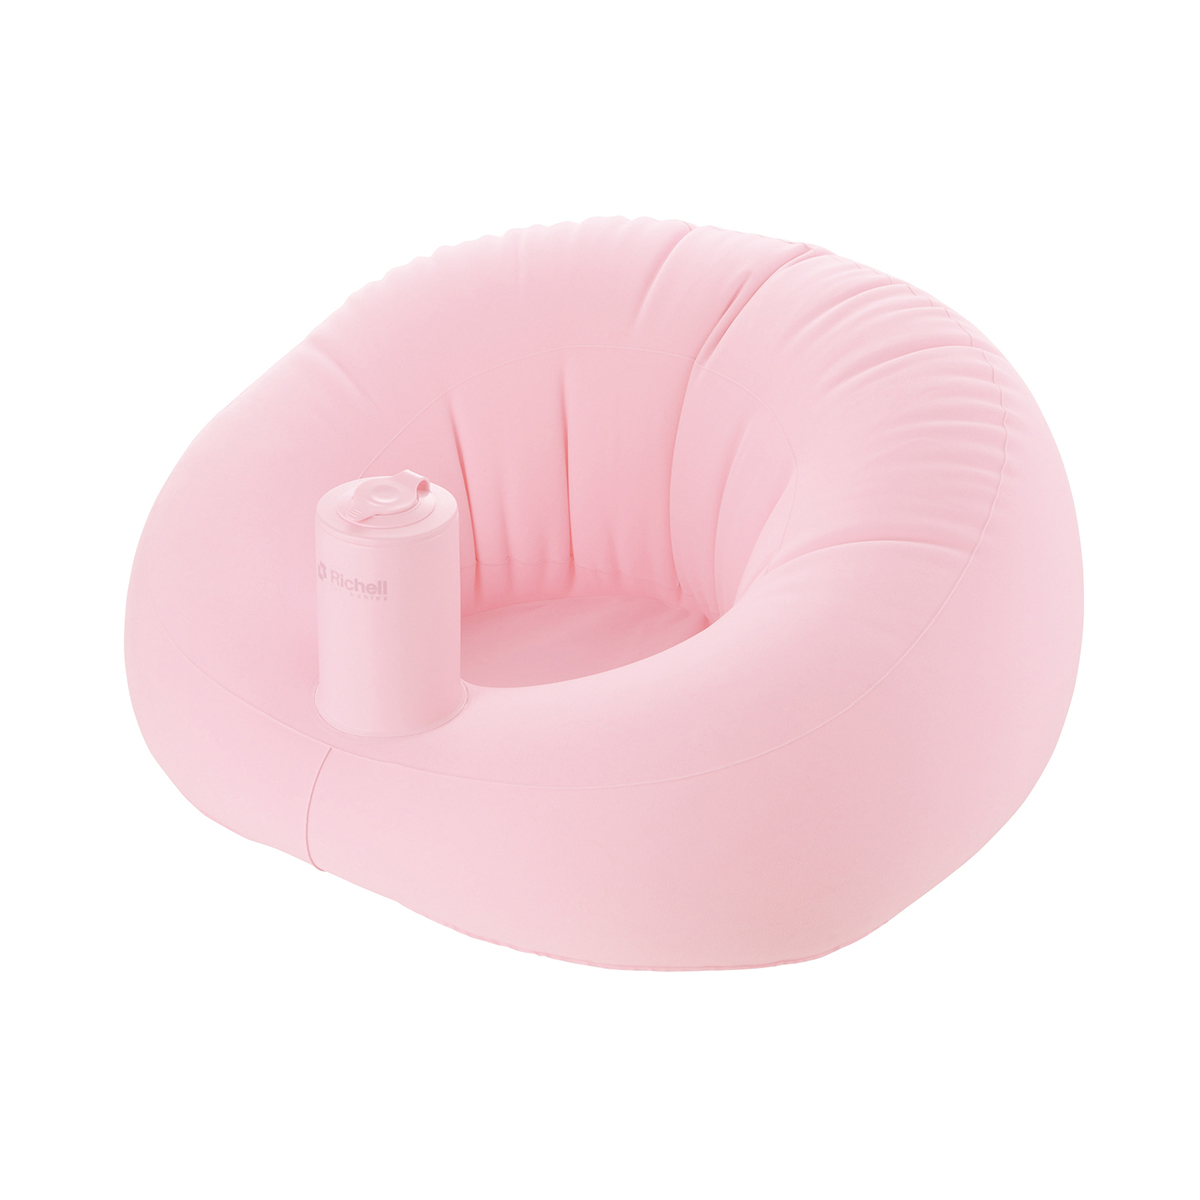 New Richell fluffy baby chair R Green From japan 